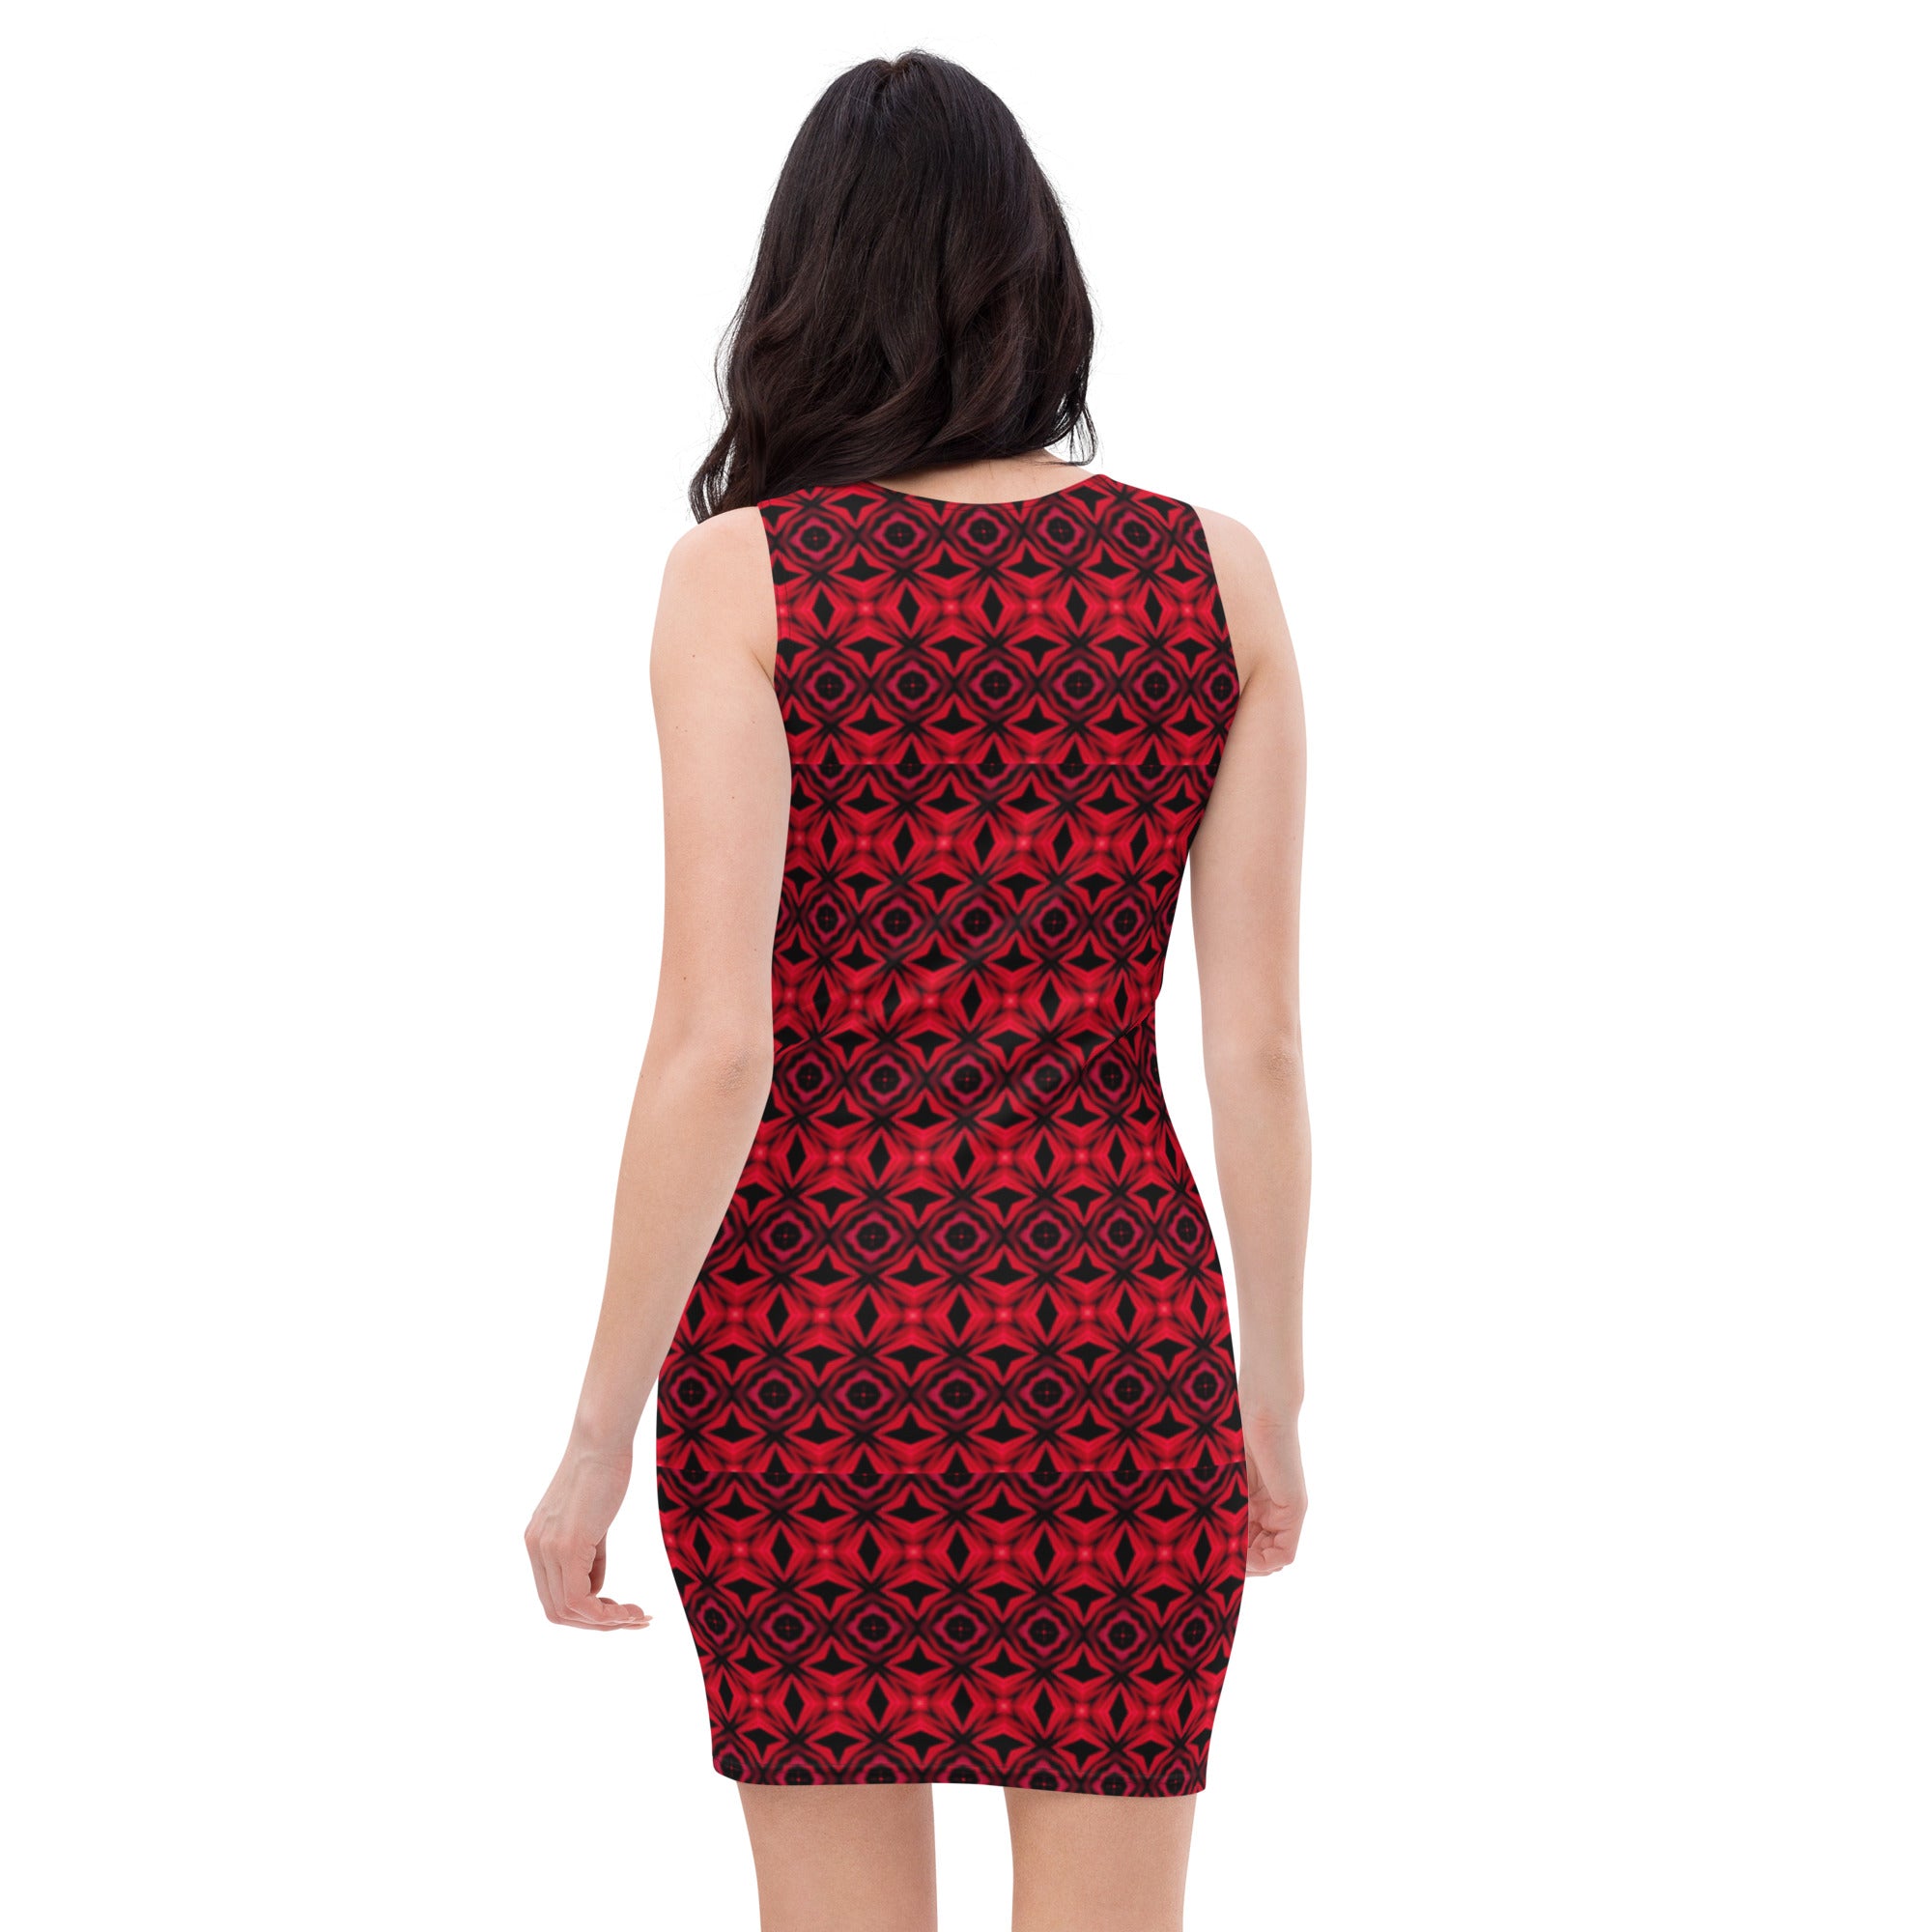 Red and Black Passion, Sublimation Cut & Sew Dress, by Sensus Stduio Design